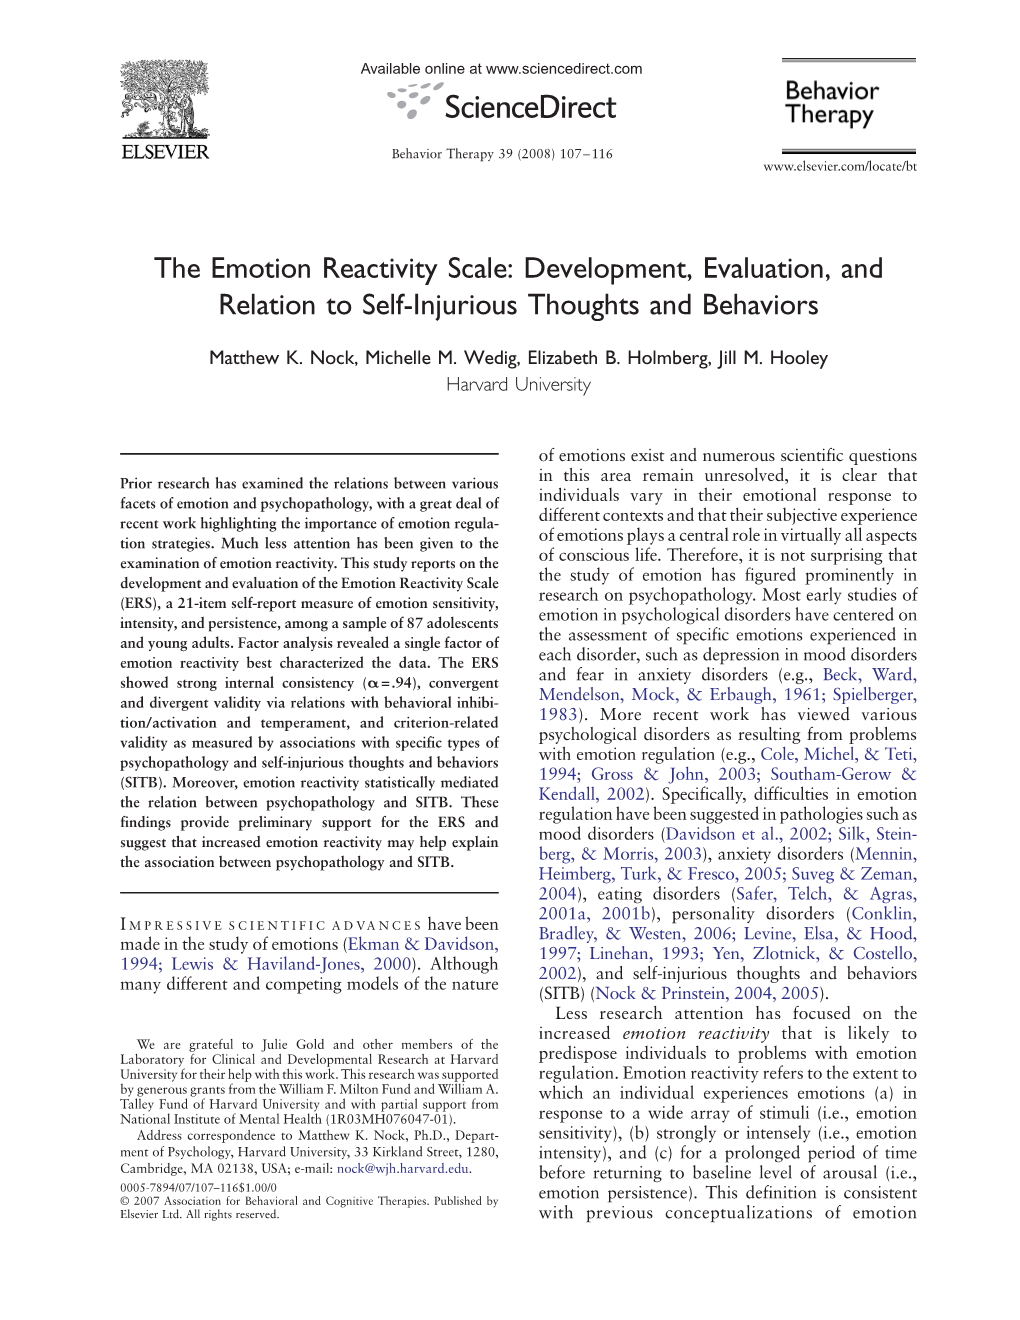 The Emotion Reactivity Scale: Development, Evaluation, and Relation to Self-Injurious Thoughts and Behaviors